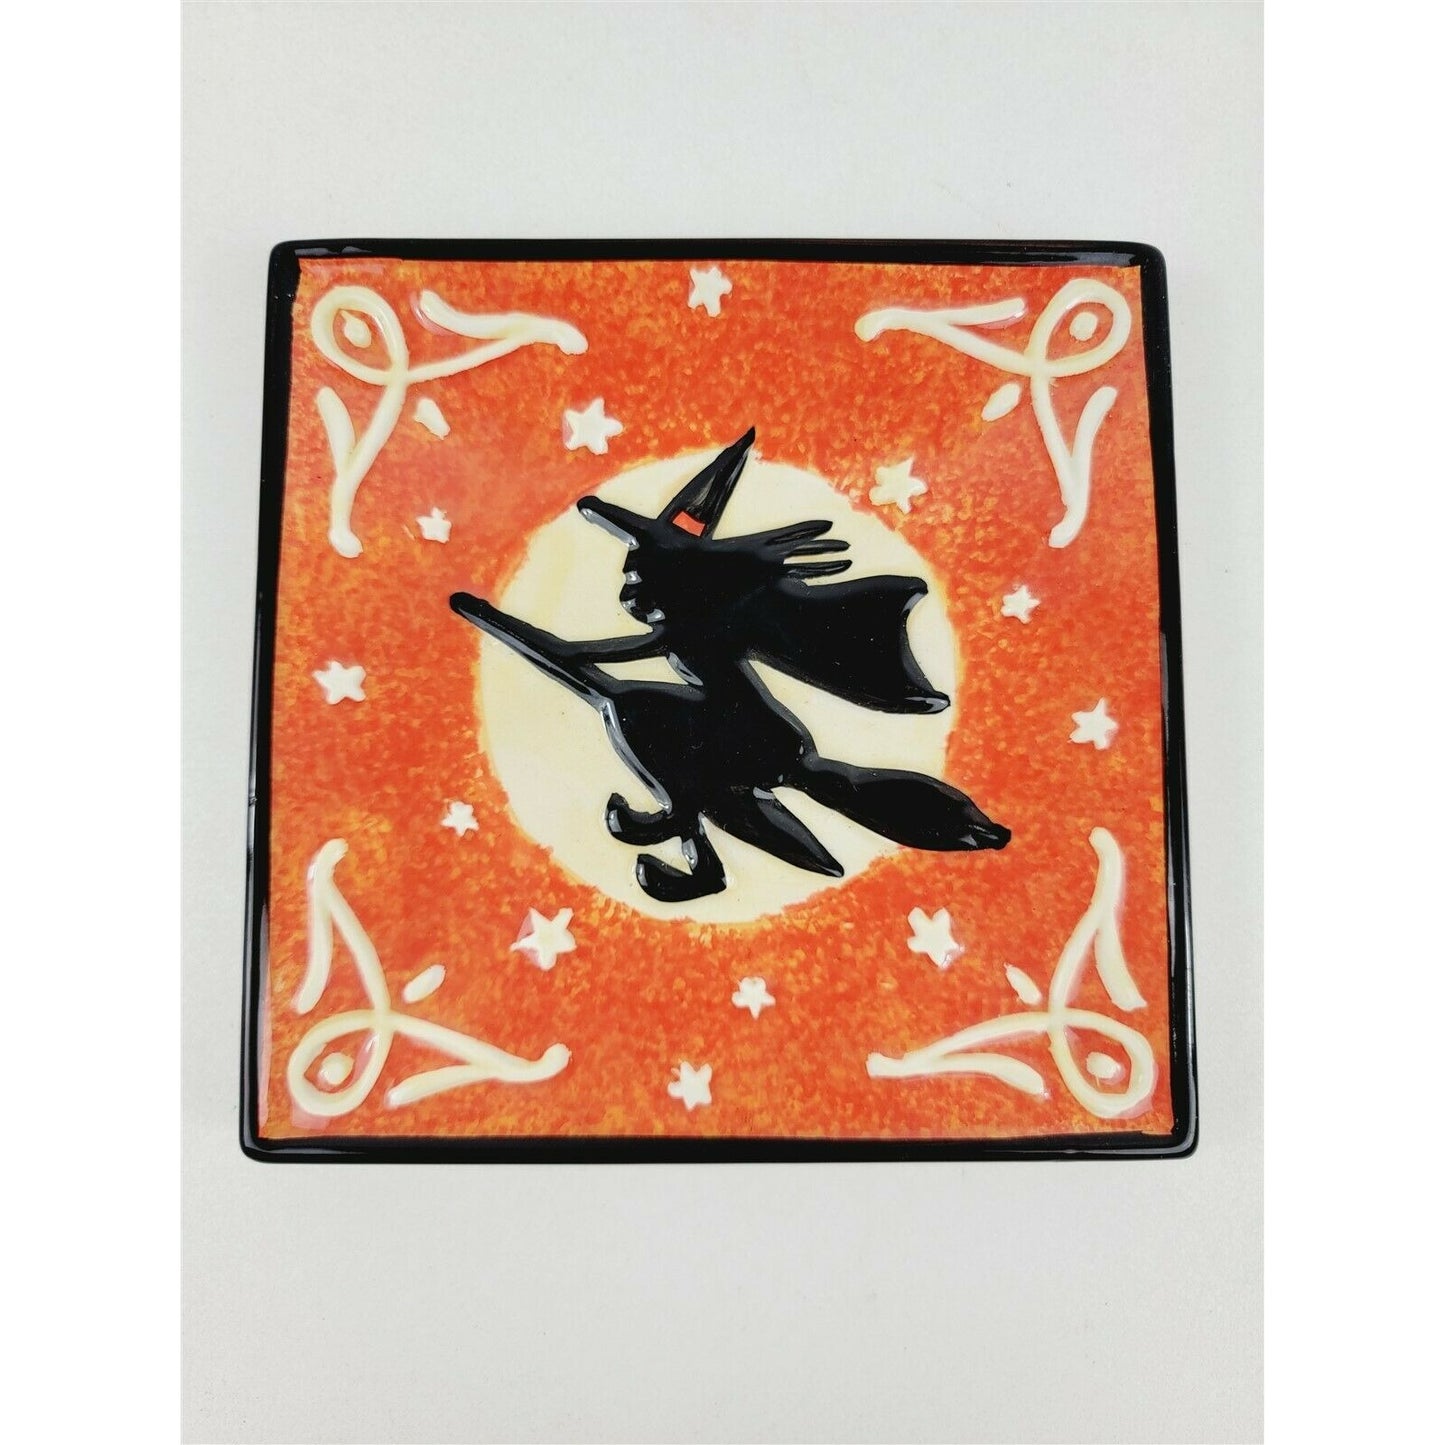 2 Vintage Handpainted Halloween Square Plates Black Cat Witch Riding Broom 6"